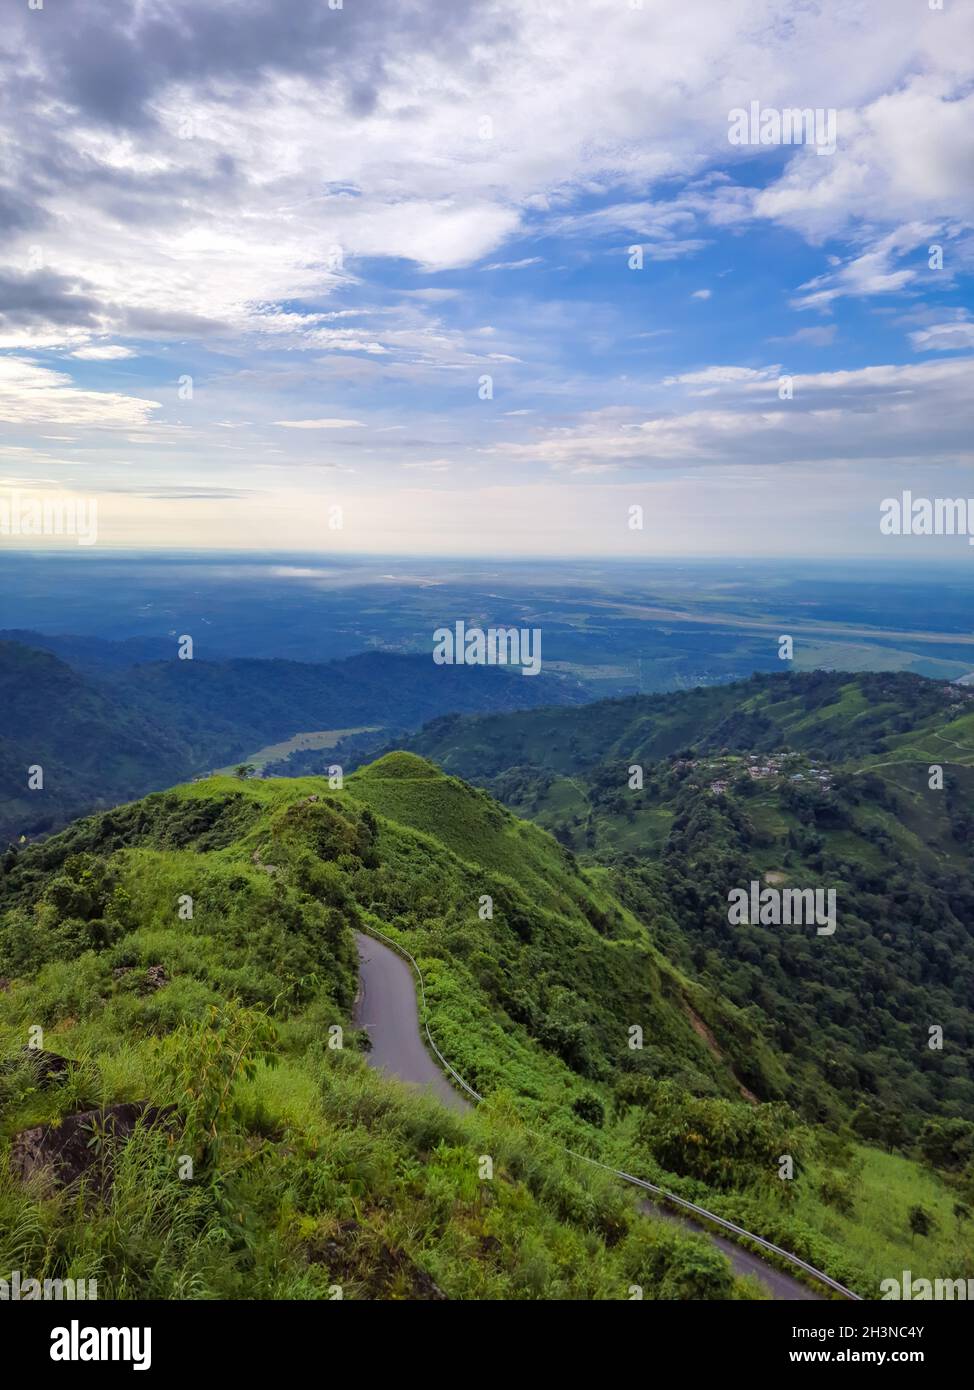 green mountain with dramatic sky at morning from hill top image is taken at kurseong darjeeling west bengal india. Stock Photo